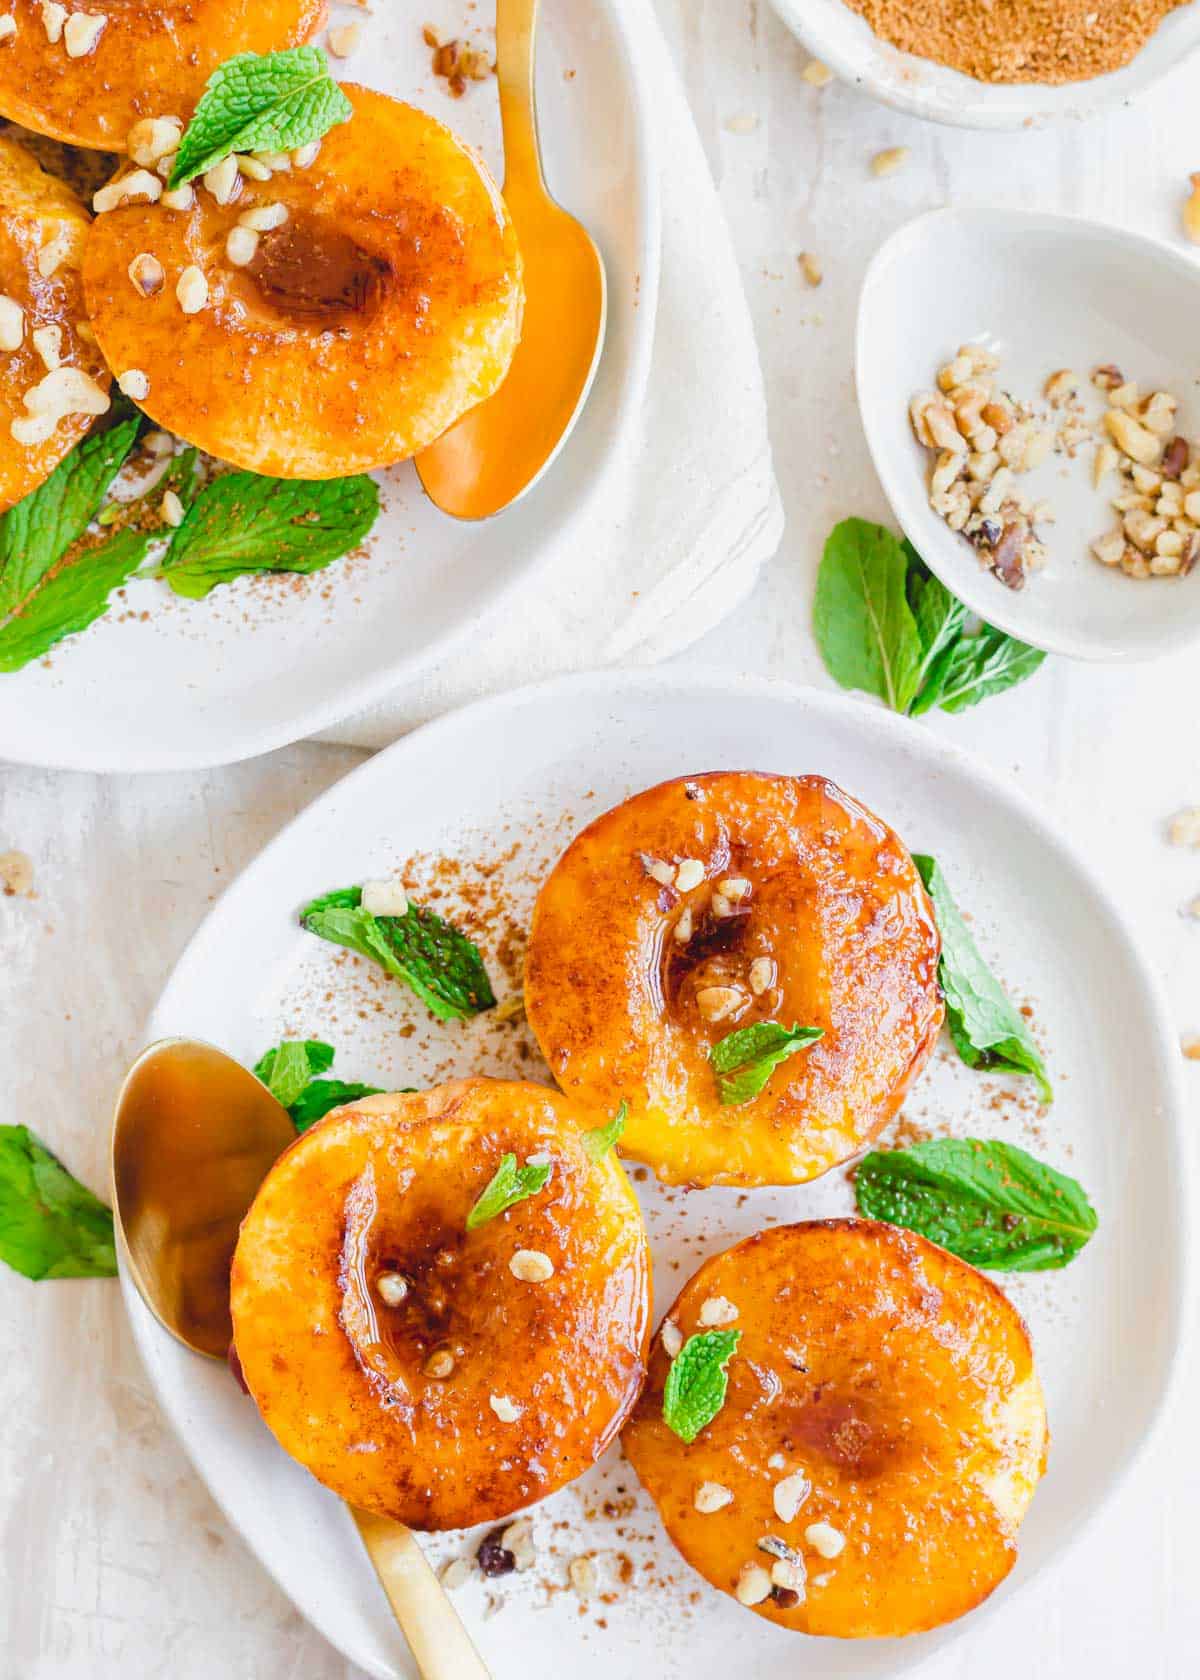 Caramelized cinnamon sugar peaches made in the air fryer garnished with chopped nuts and mint on a plate.